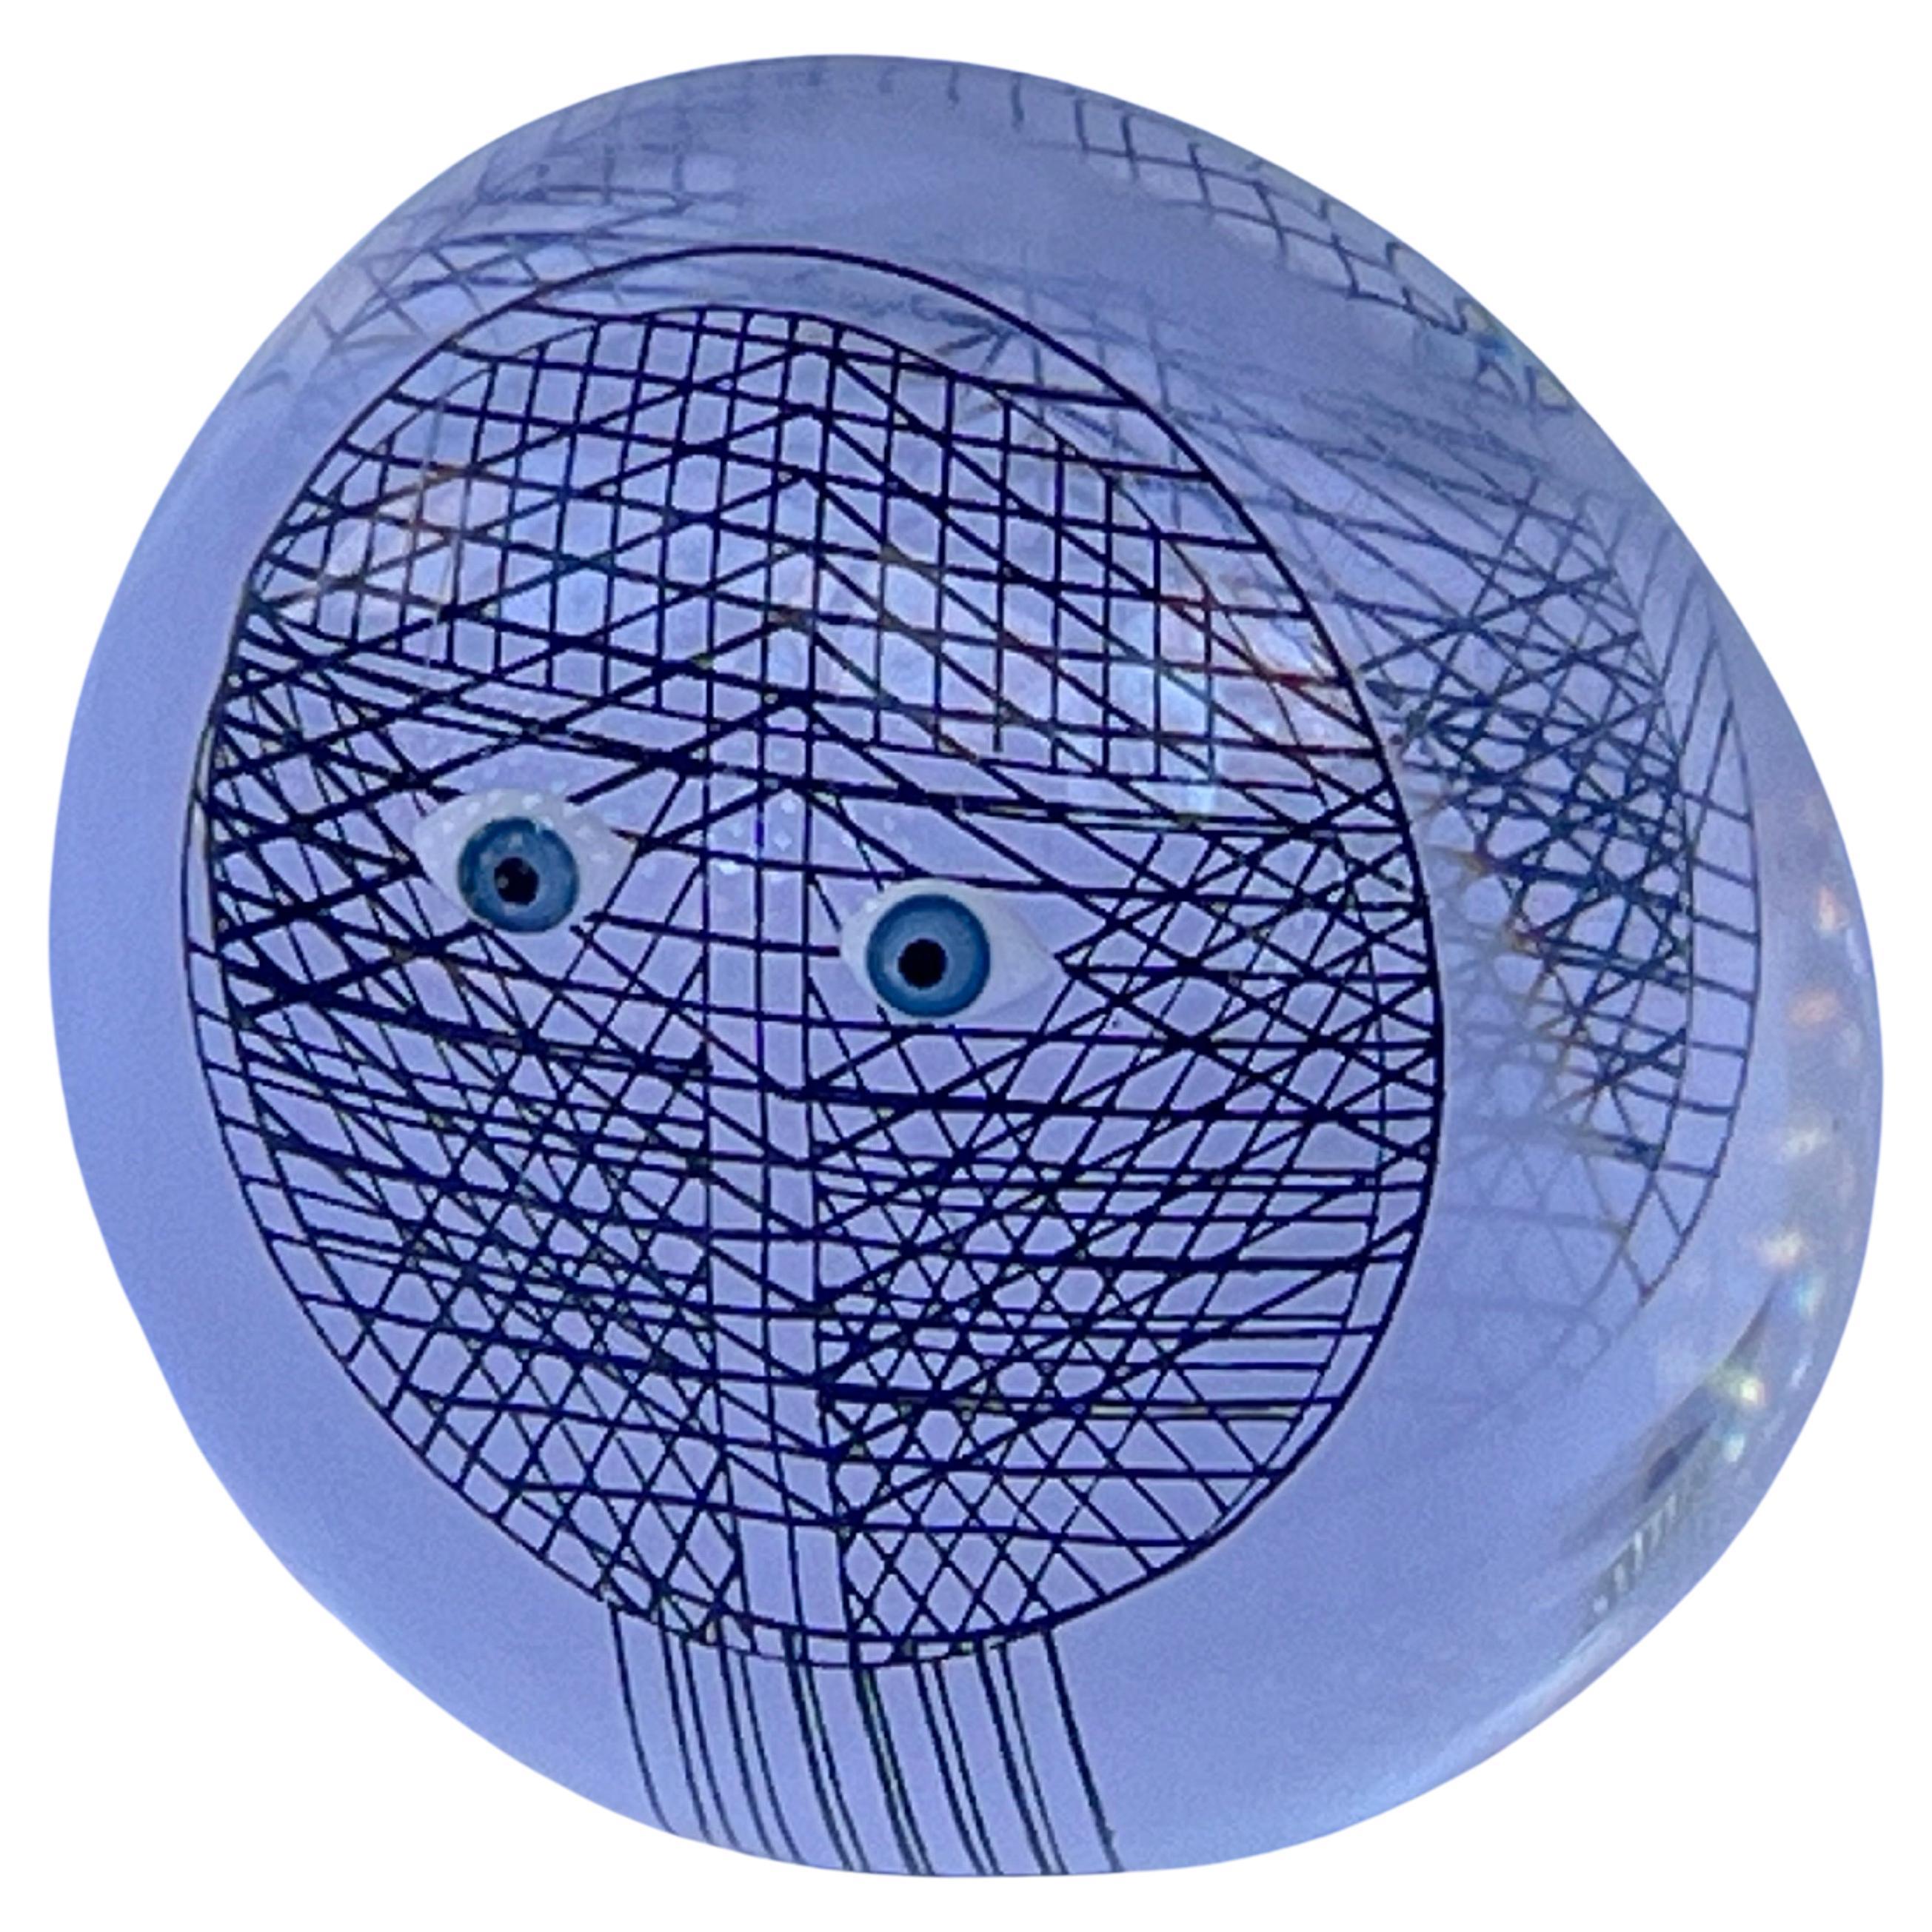 A vintage circa 1970's op-art style paperweight in lucite or acrylic featuring two piercing blue eyes set against a black grid like background by Merle Edleman. Anyone else thinking of the movie Tron or have I dated myself? This well designed desk